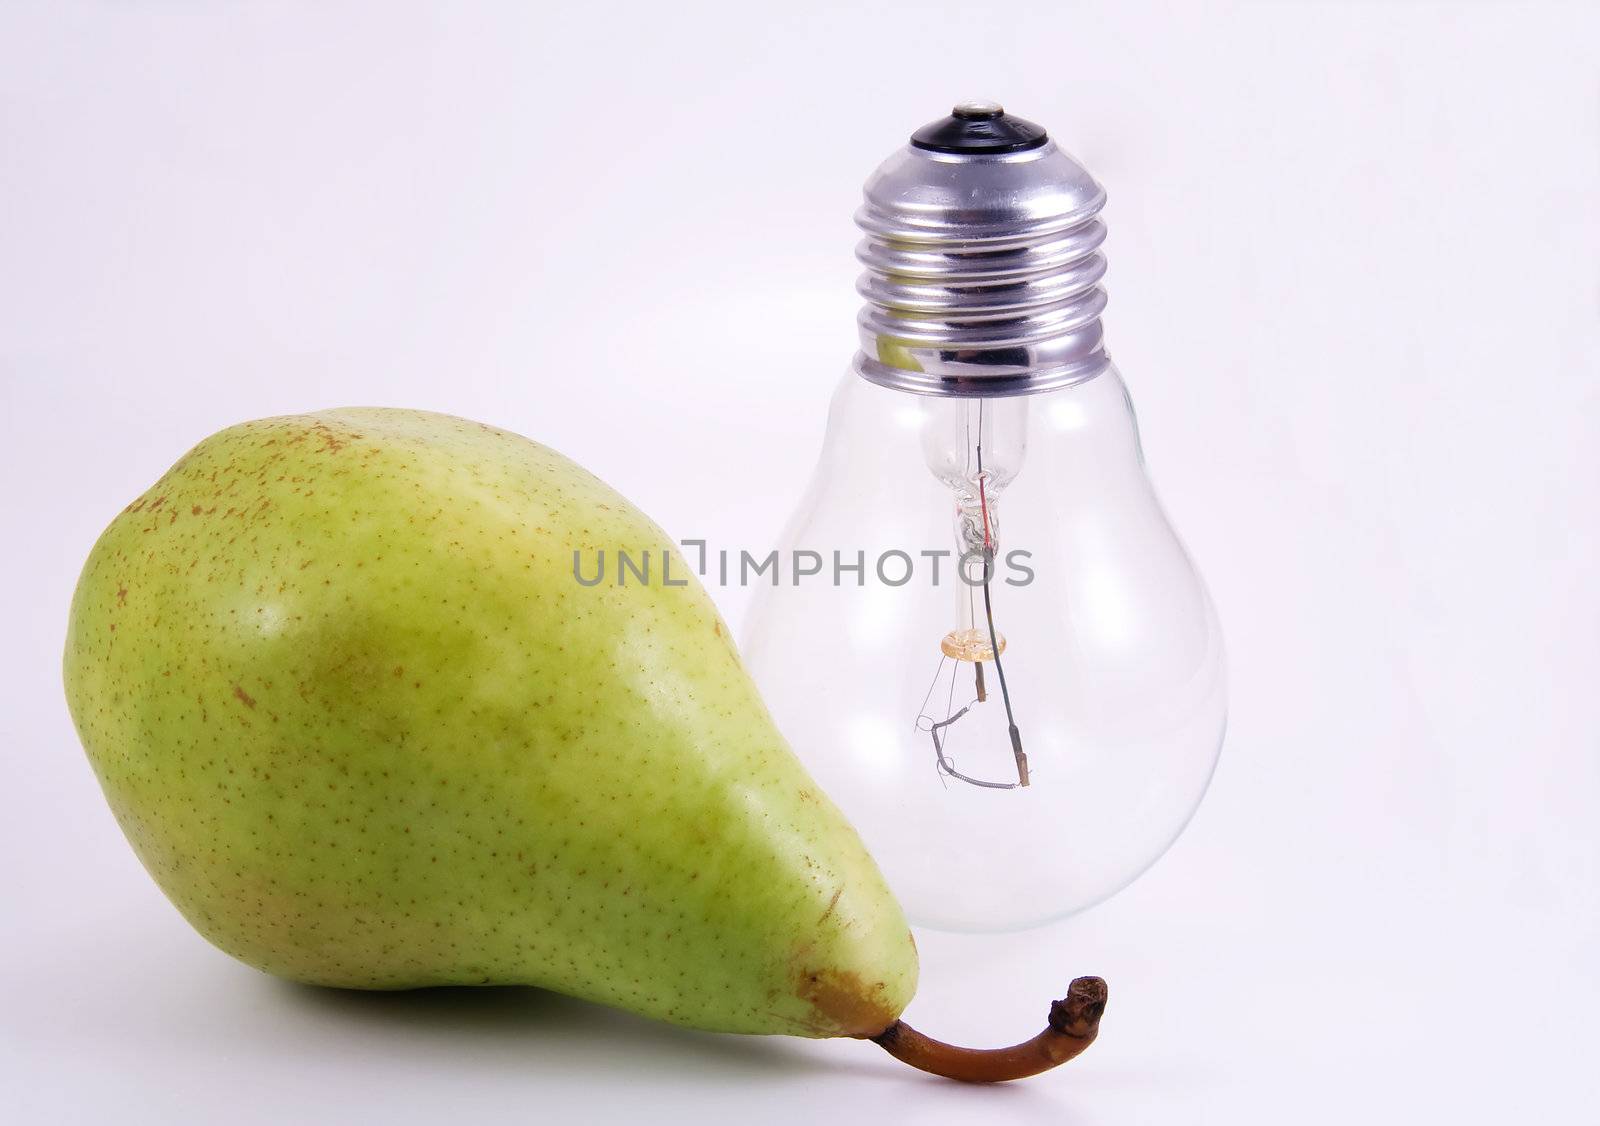 Green pear and electric bulb on white by serpl